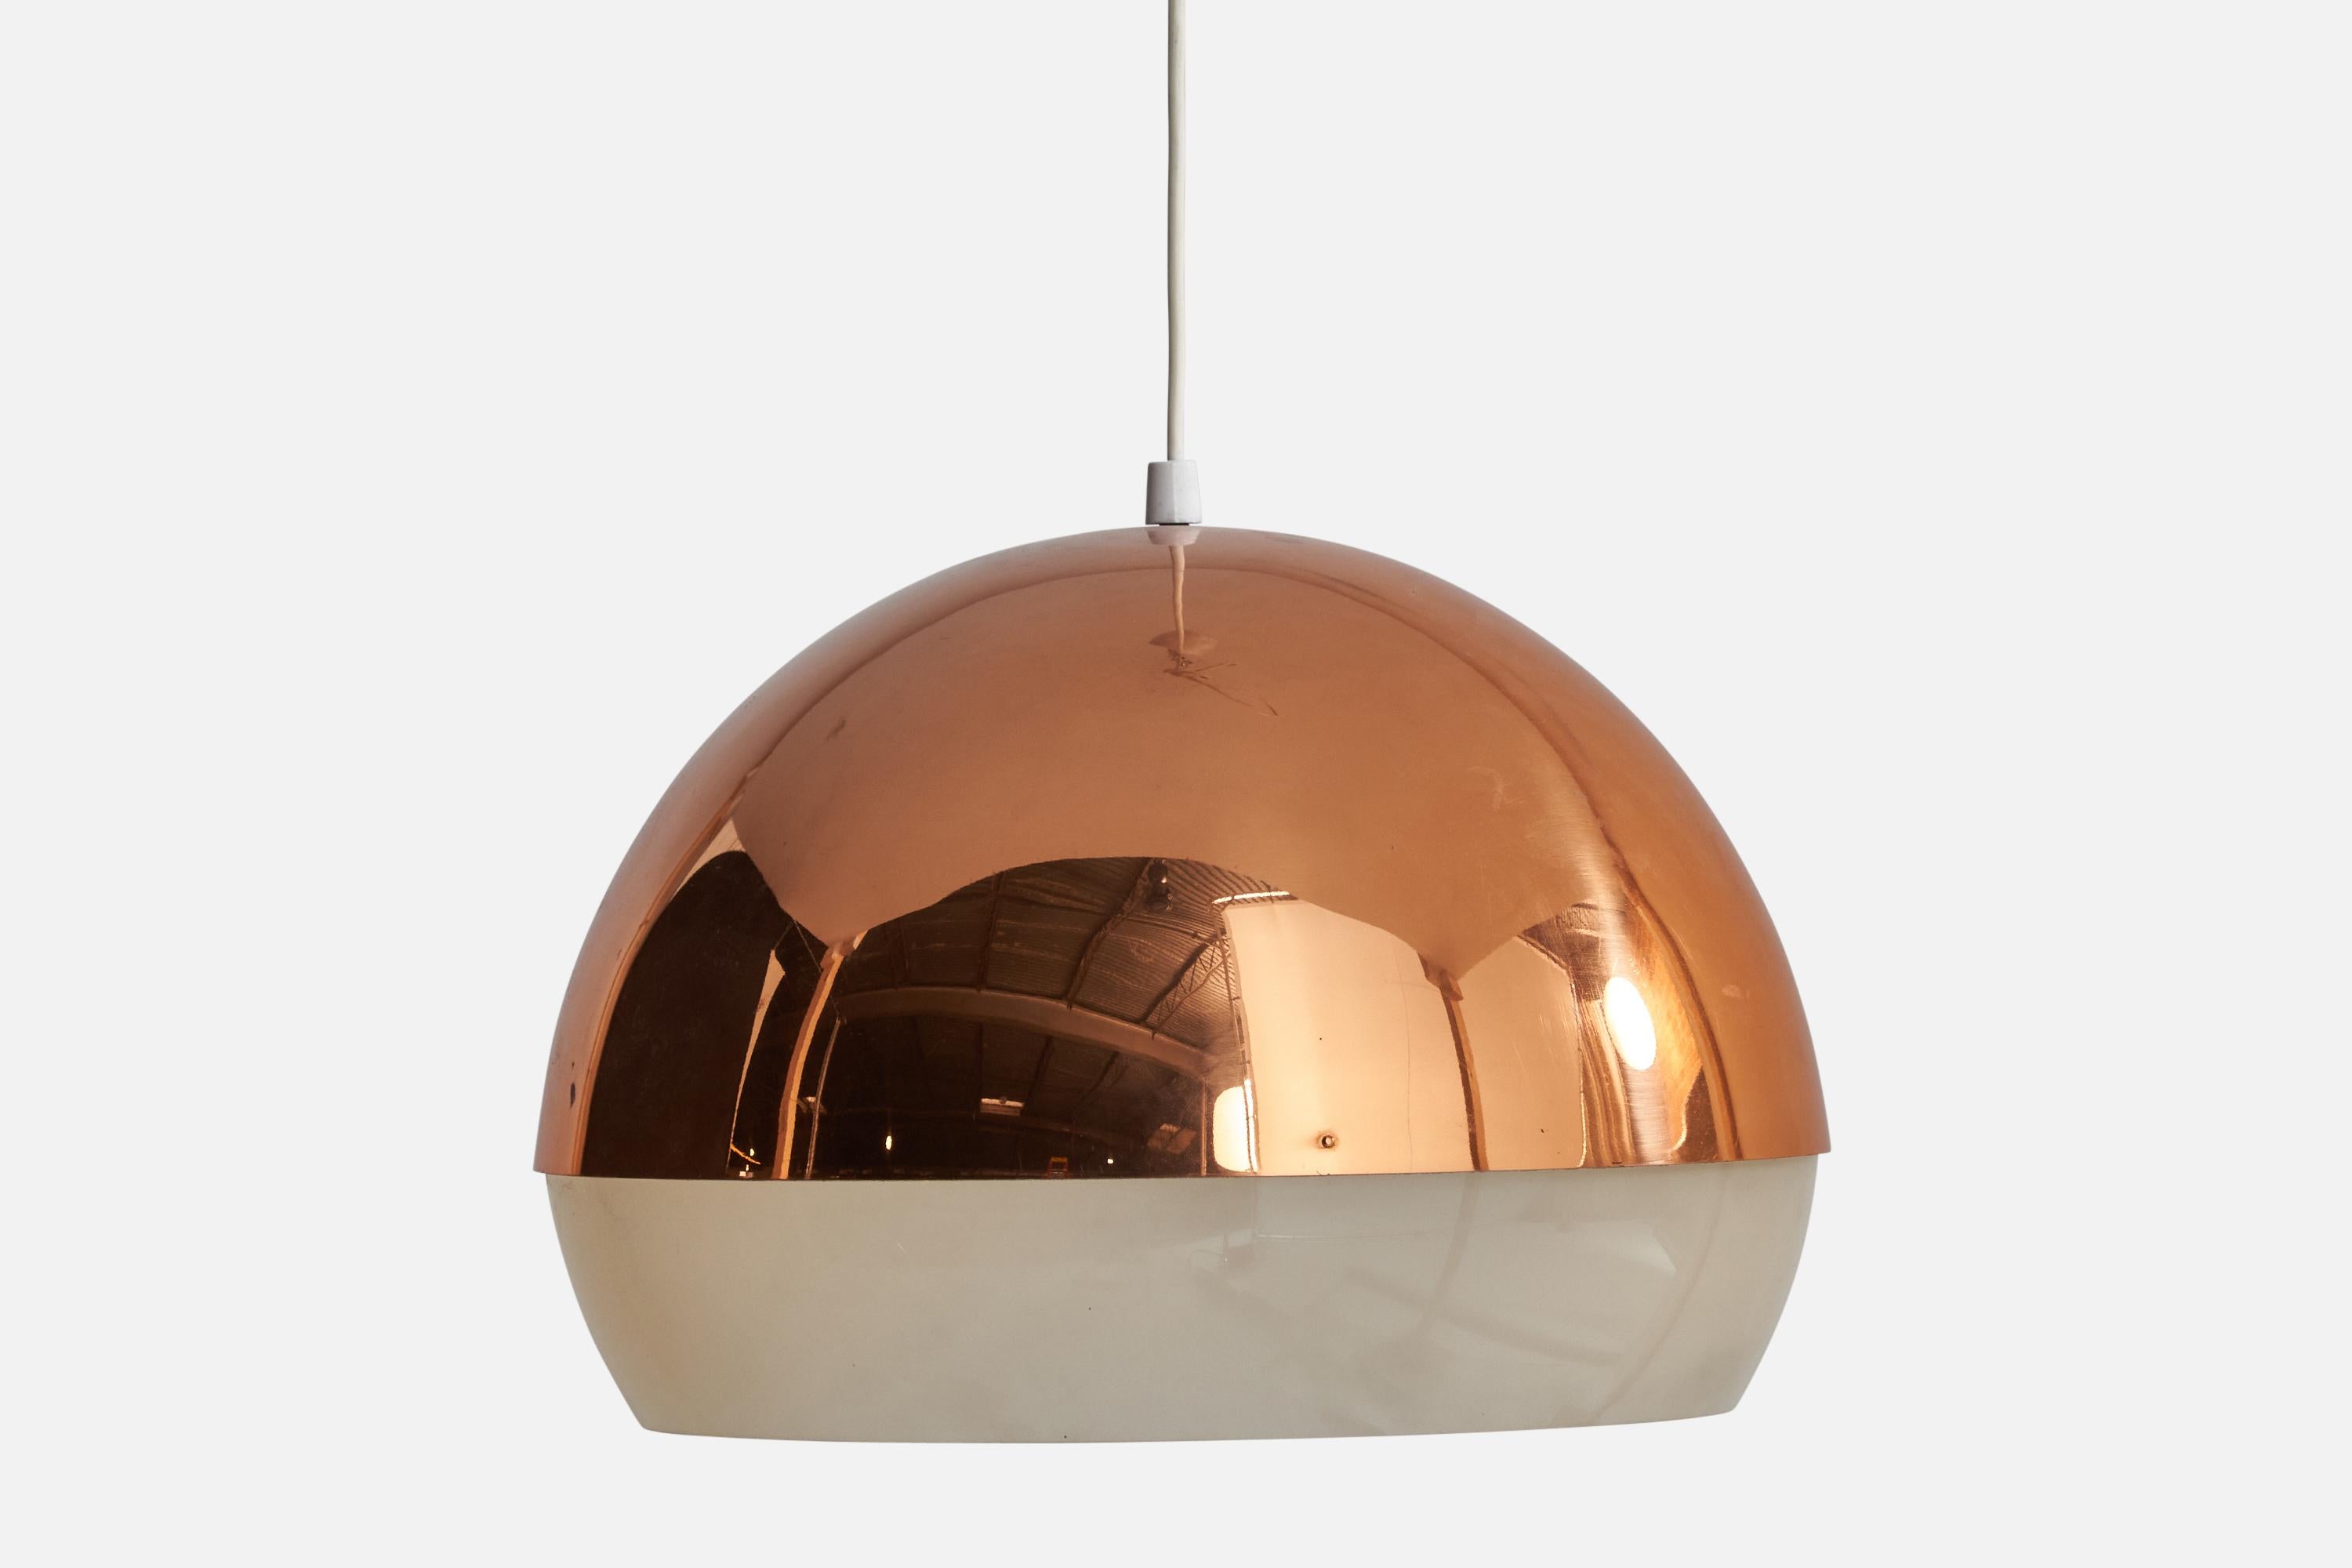 A copper and acrylic pendant light designed by Yki Nummi and produced by Orno, Finland, c. 1960s.

Dimensions of canopy (inches): 2.55” H x 3.5” Diameter
Socket takes standard E-26 bulbs. 1 socket.There is no maximum wattage stated on the fixture.